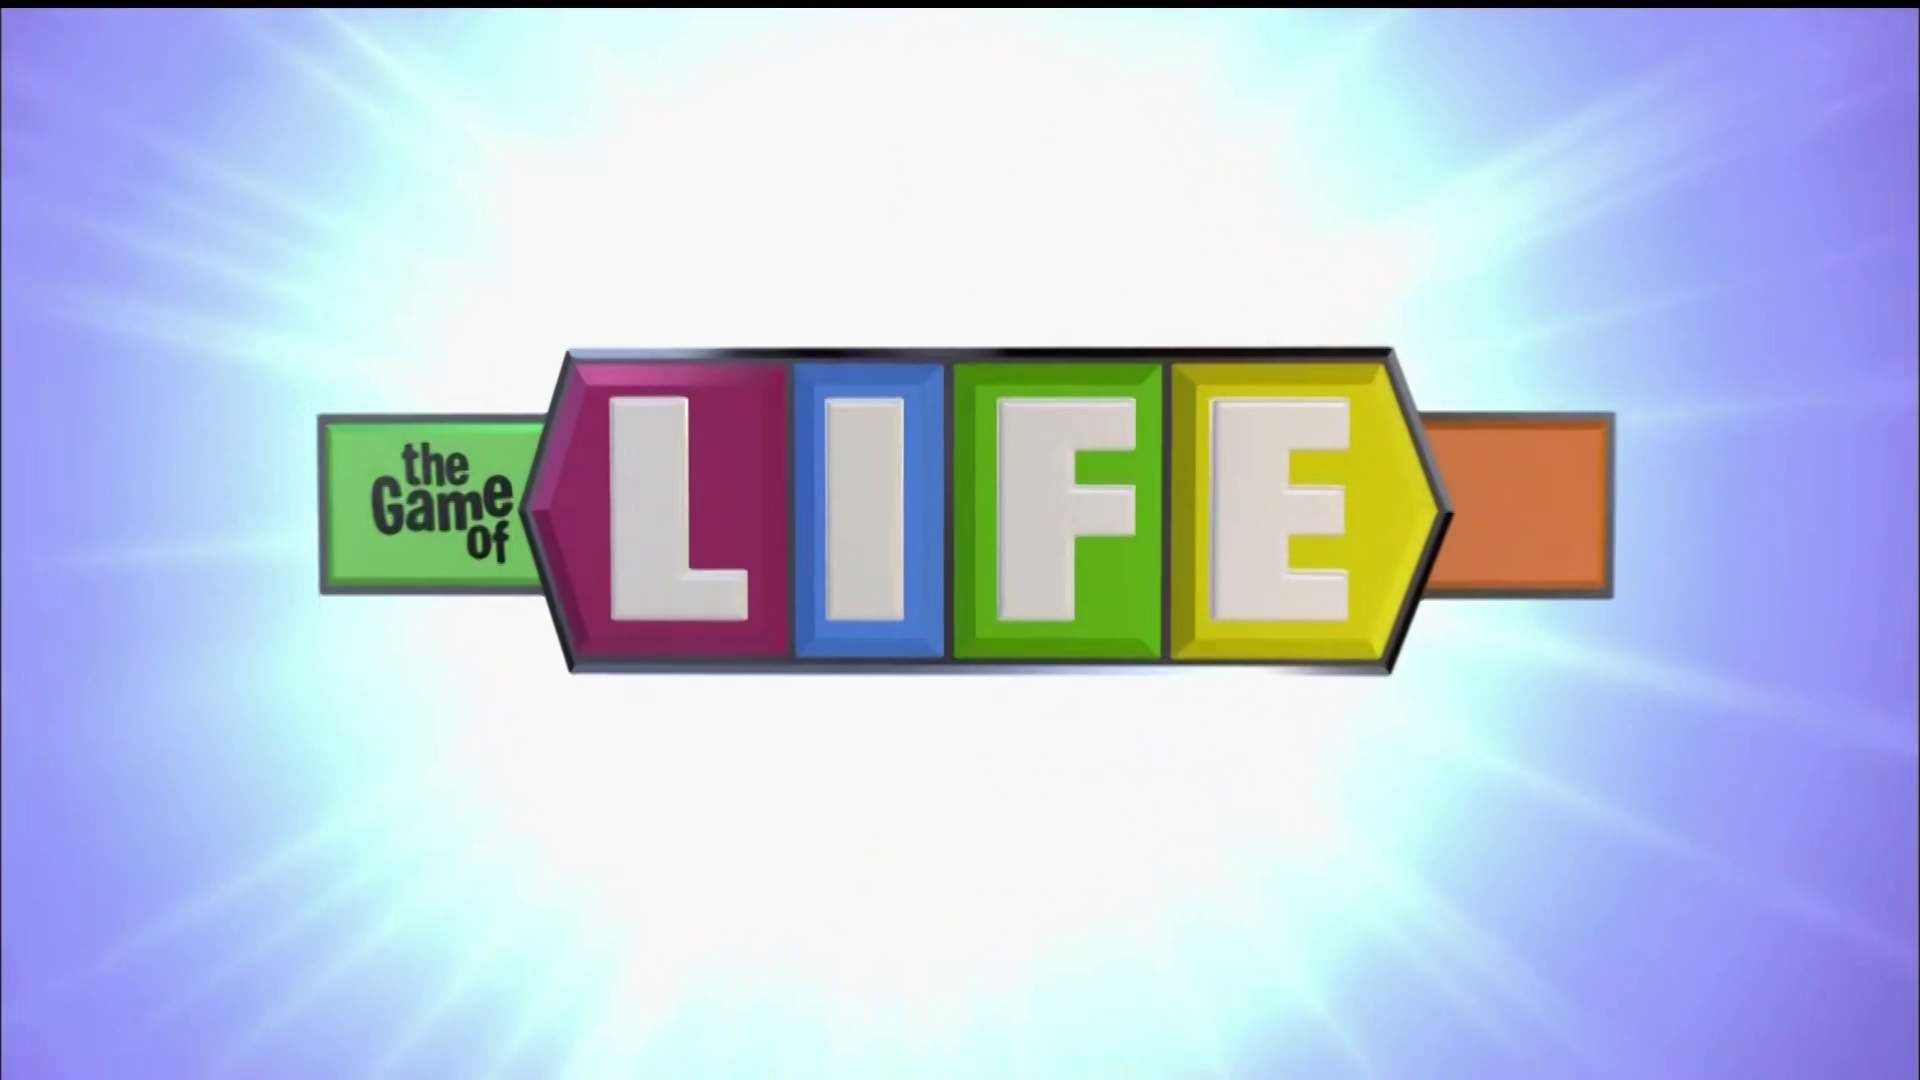 The Game of Life - Wikipedia